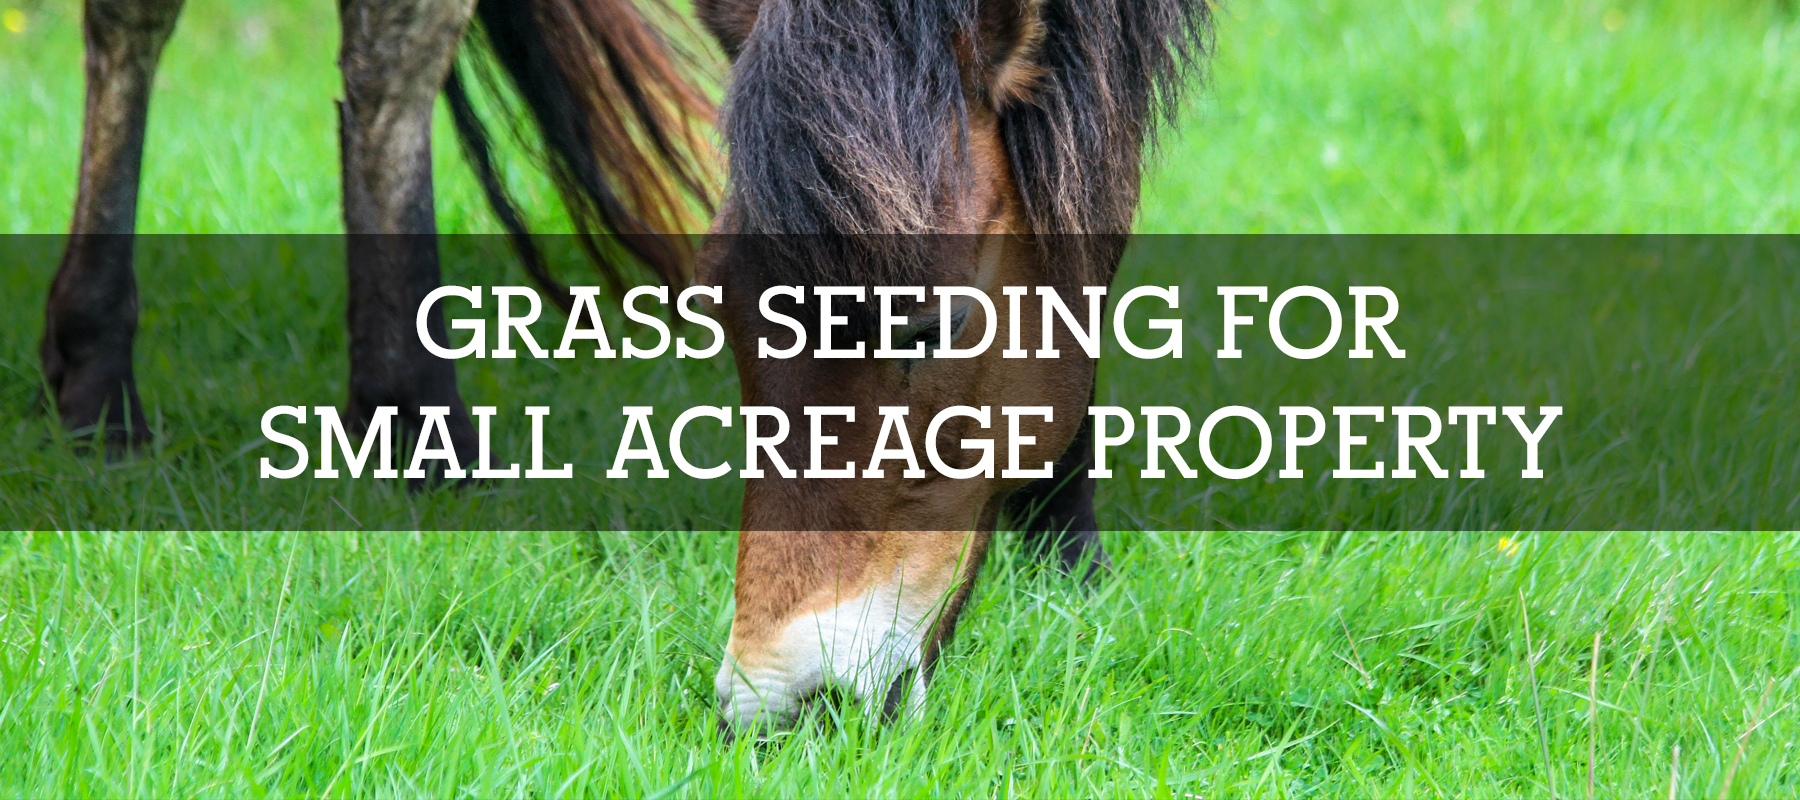 GRASS SEEDING FOR SMALL ACREAGE PROPERTY